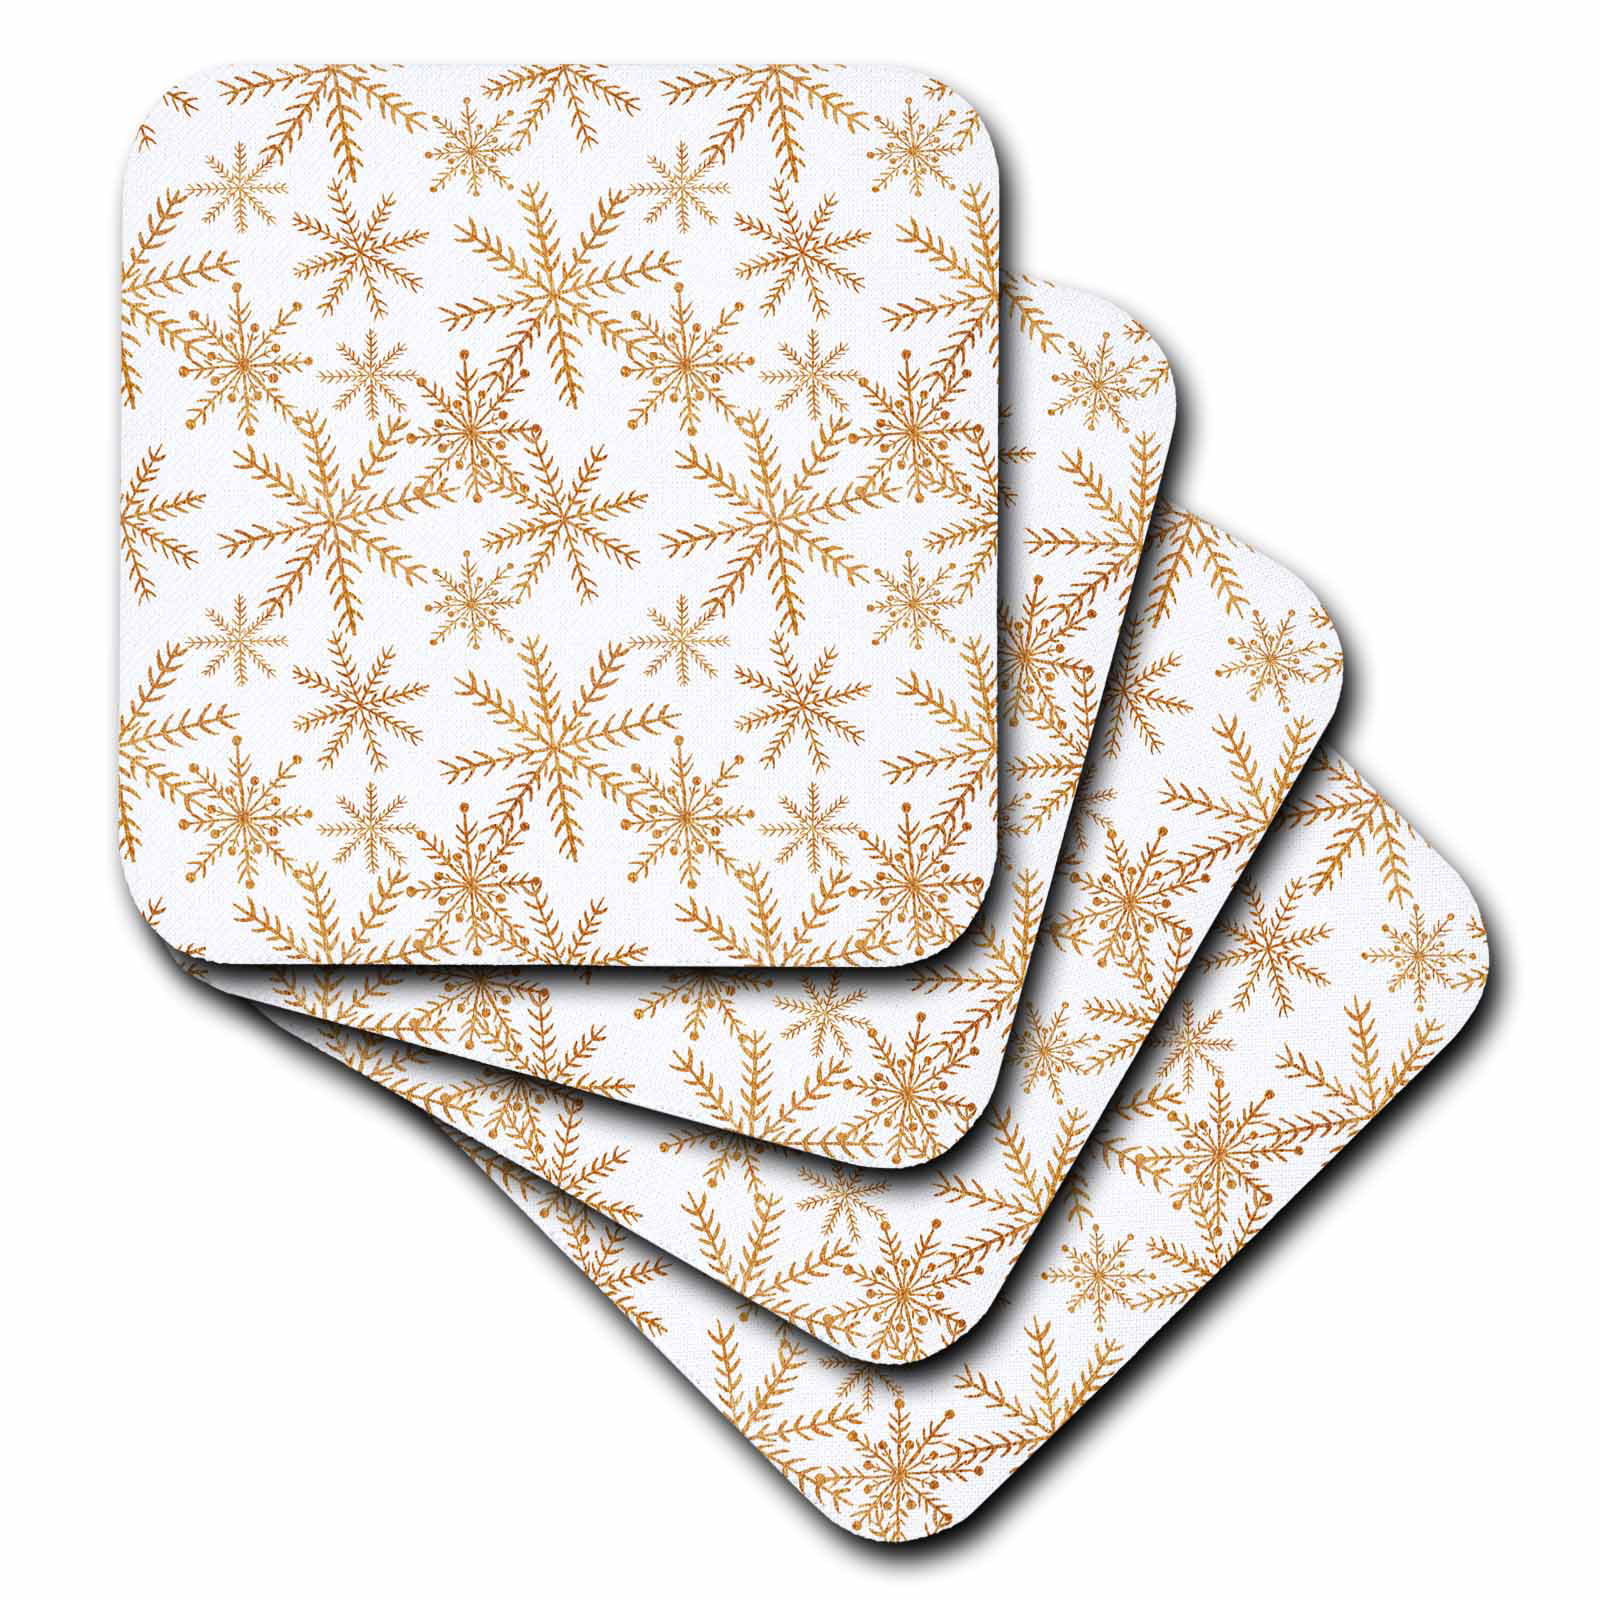 3dRose CST_8410_1 Gold on Burgundy Snowflake-Soft Coasters Set of 4 